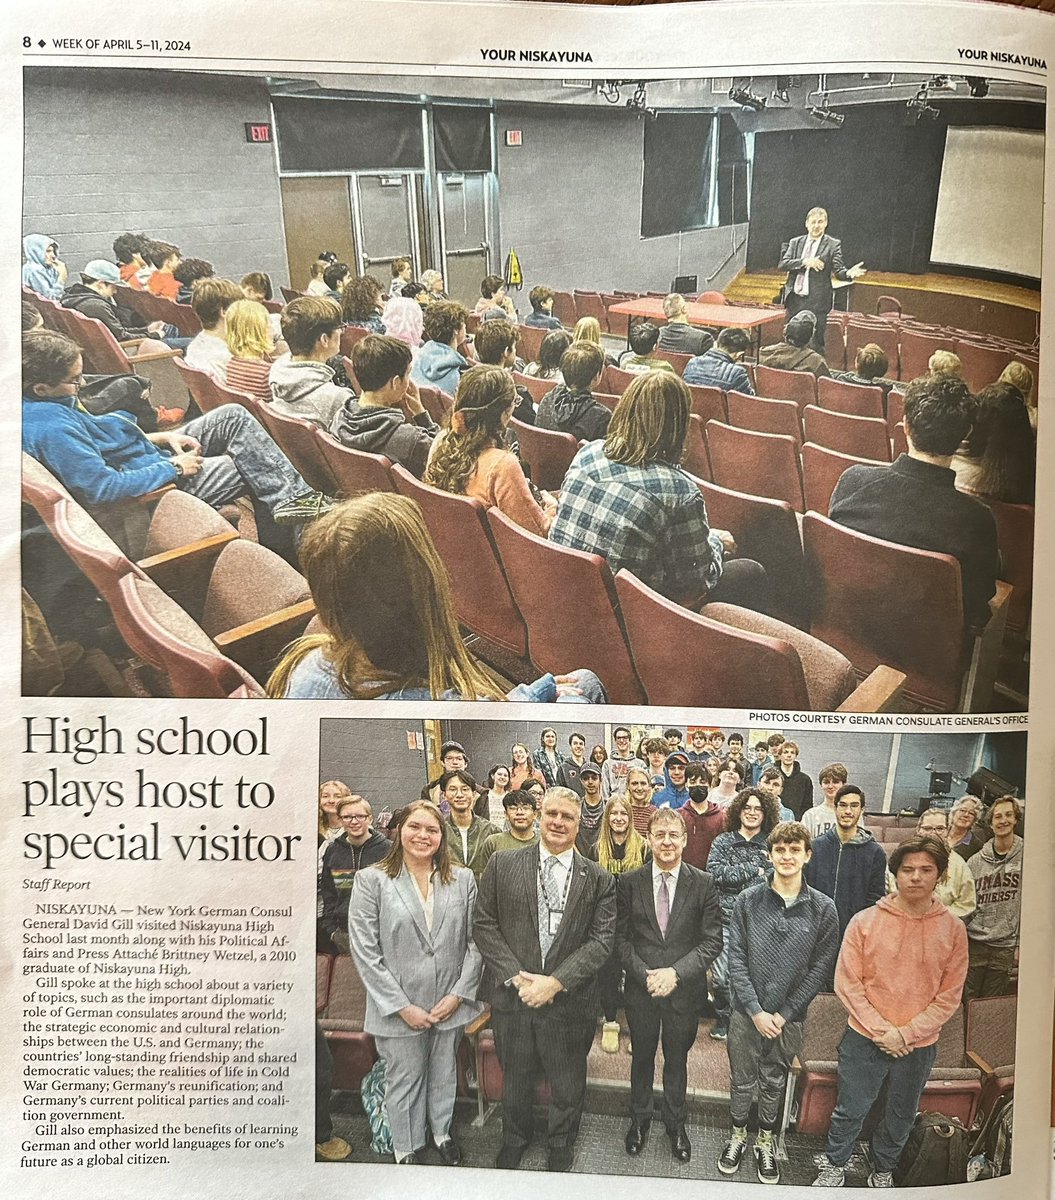 Nice to see our German Program event featuring Consul General David Gill & German Program alumna Brittney Wetzel from @GermanyNY in this week’s @YourNiskayuna! We were honored to welcome CG Gill to speak w/our German students & guests -it was a wonderful opportunity for students!